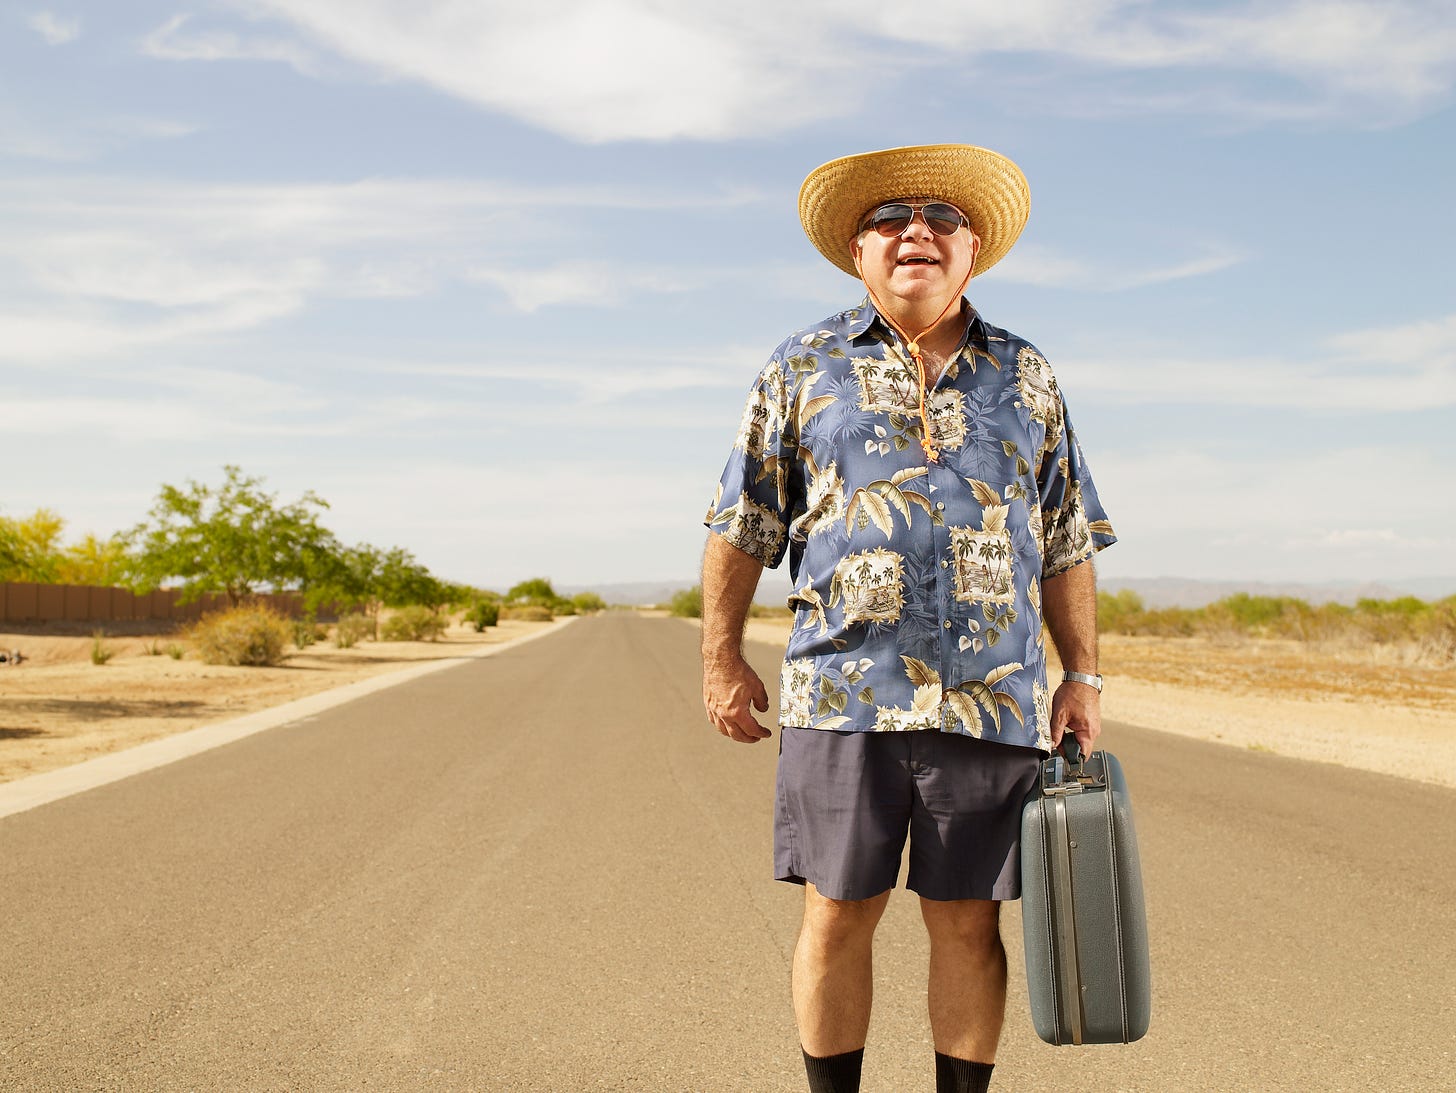 Man in straw hat and Hawaiian style shirt holding briefcase in the middle of an empty highway